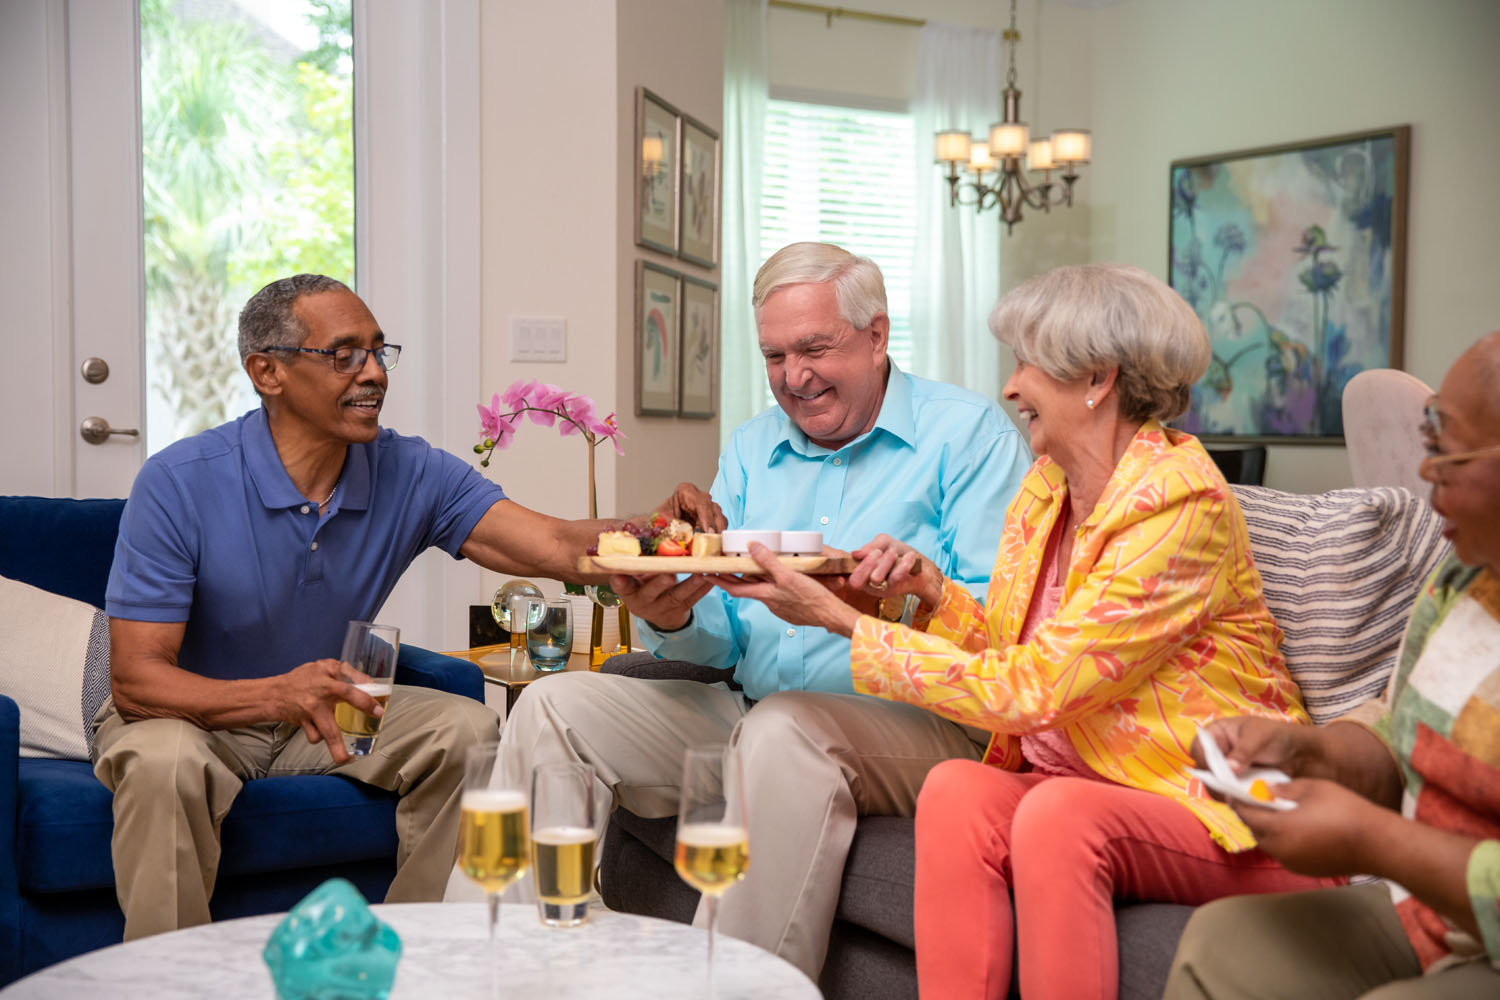 Residents passing tray of food at dinner party